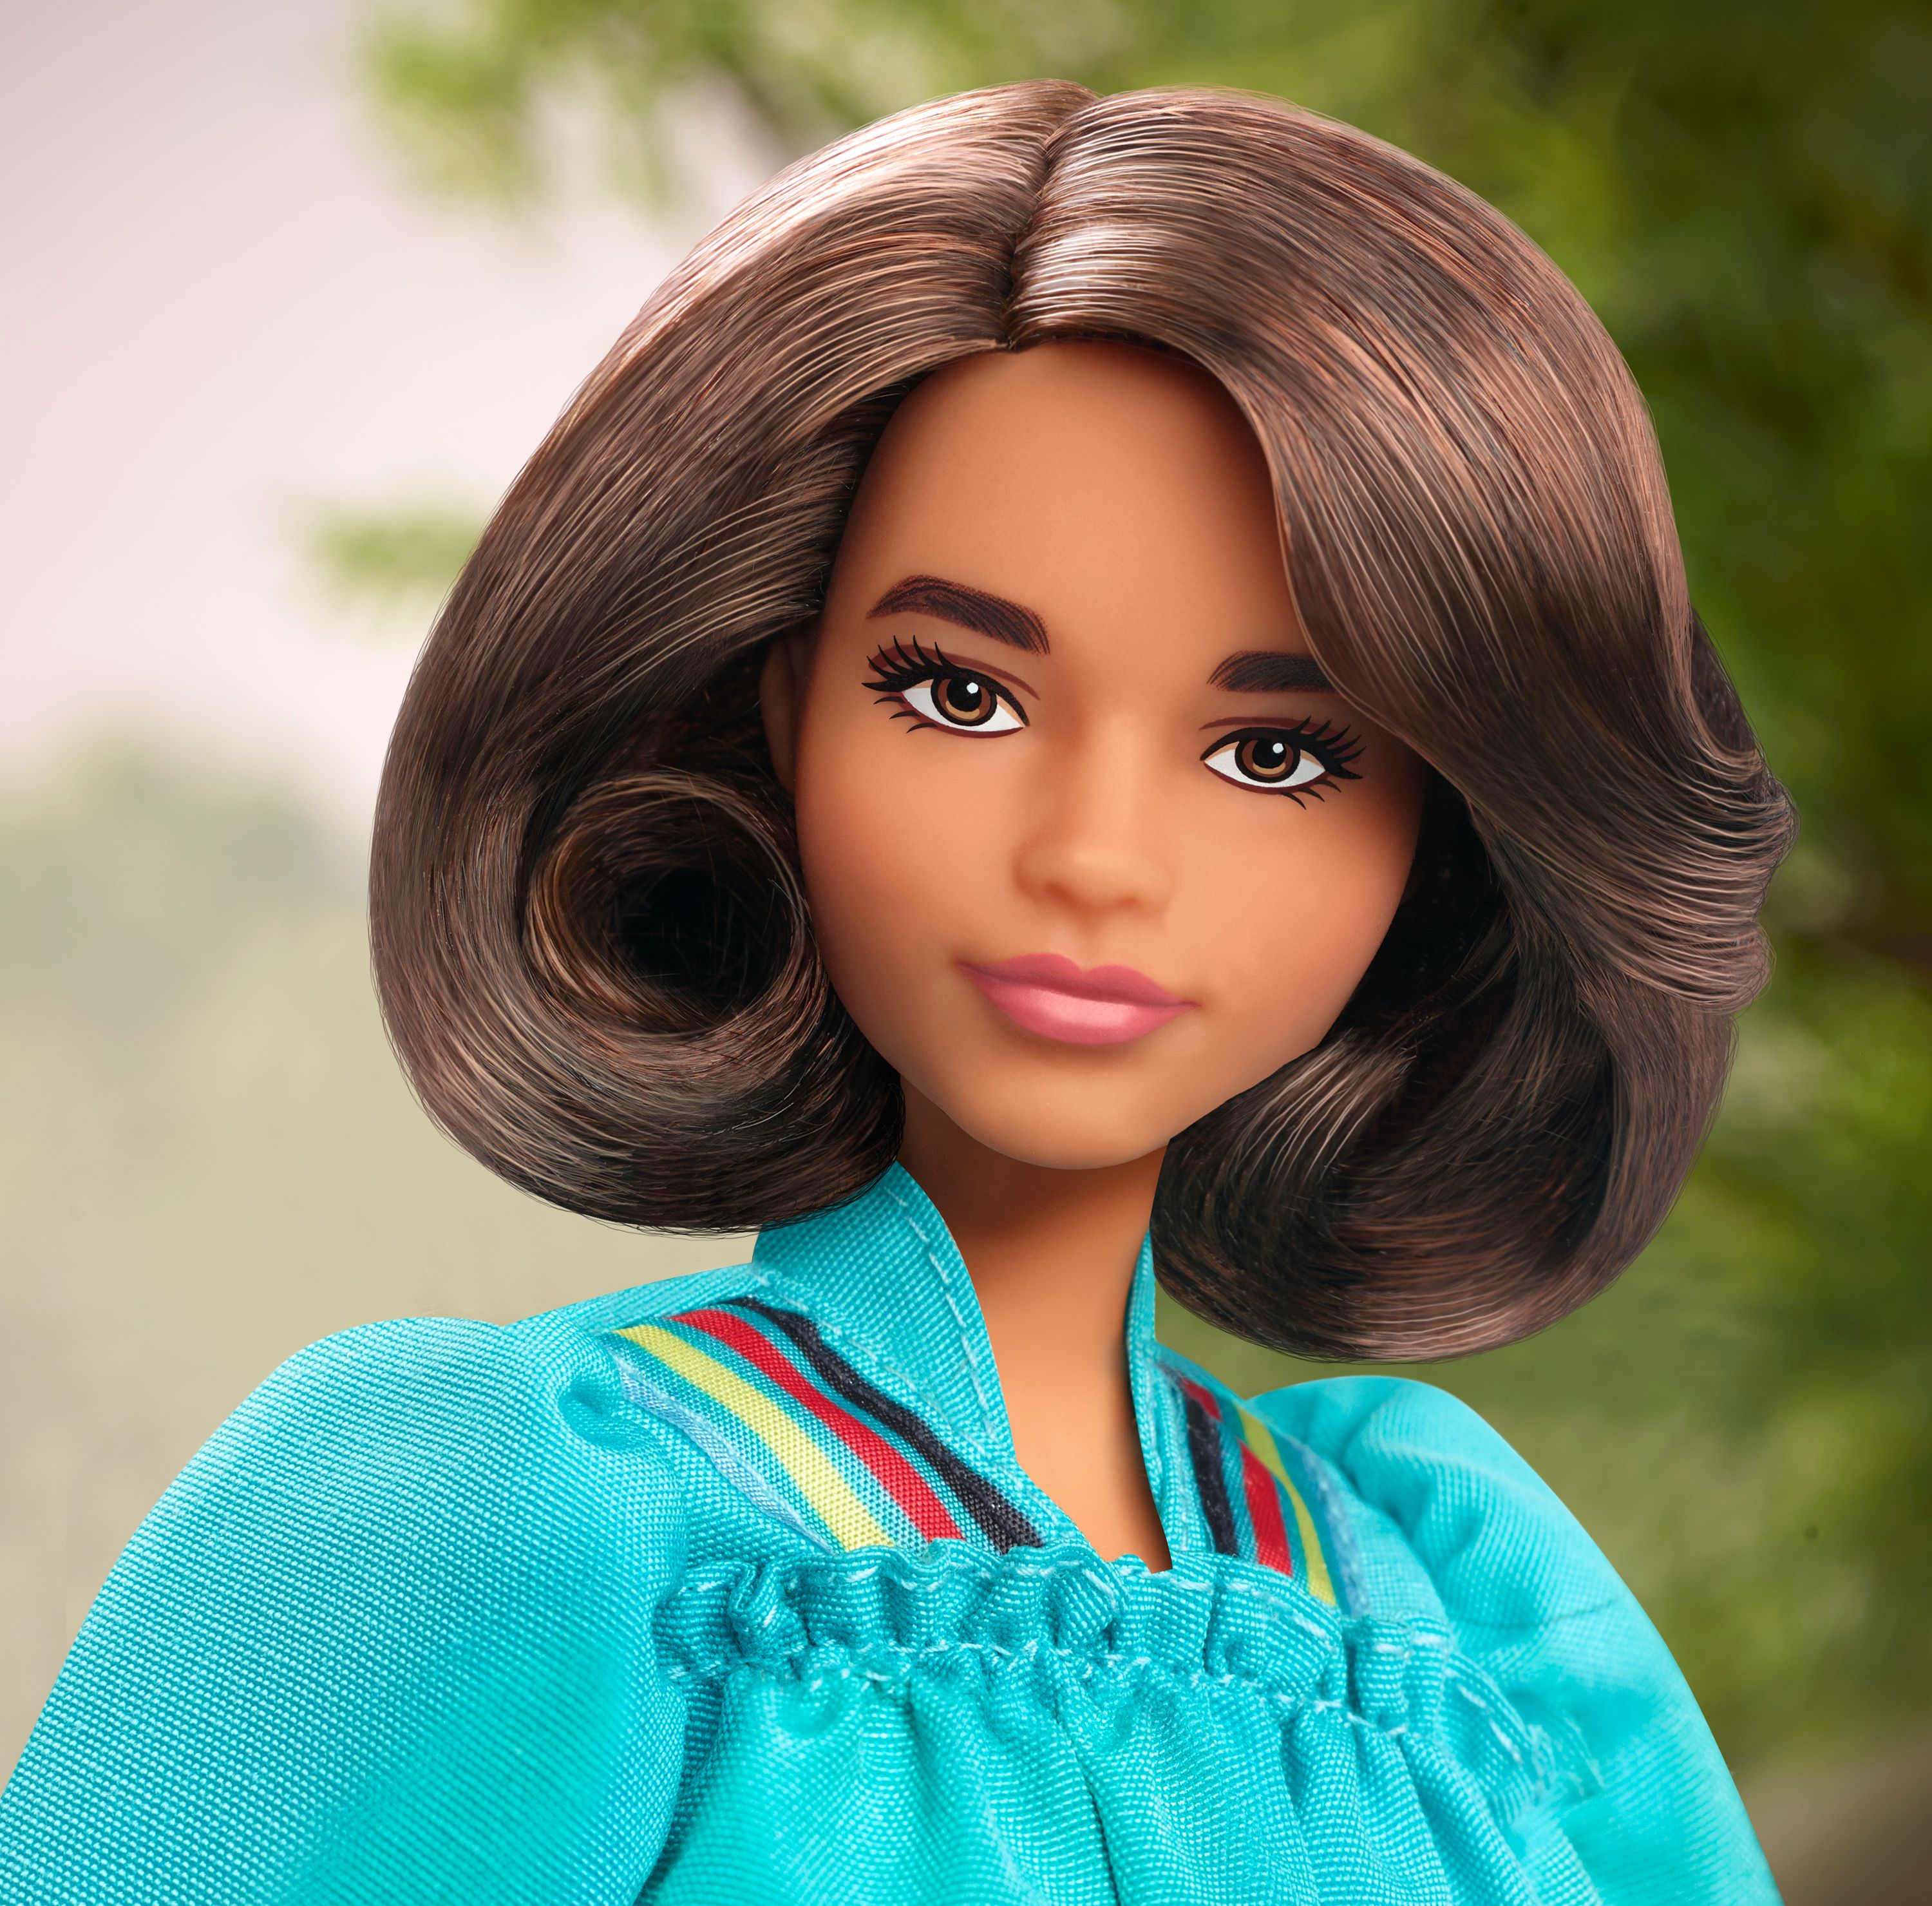 Mattel Has a New Cherokee Barbie. Not Everyone Is Happy About It. - The New  York Times